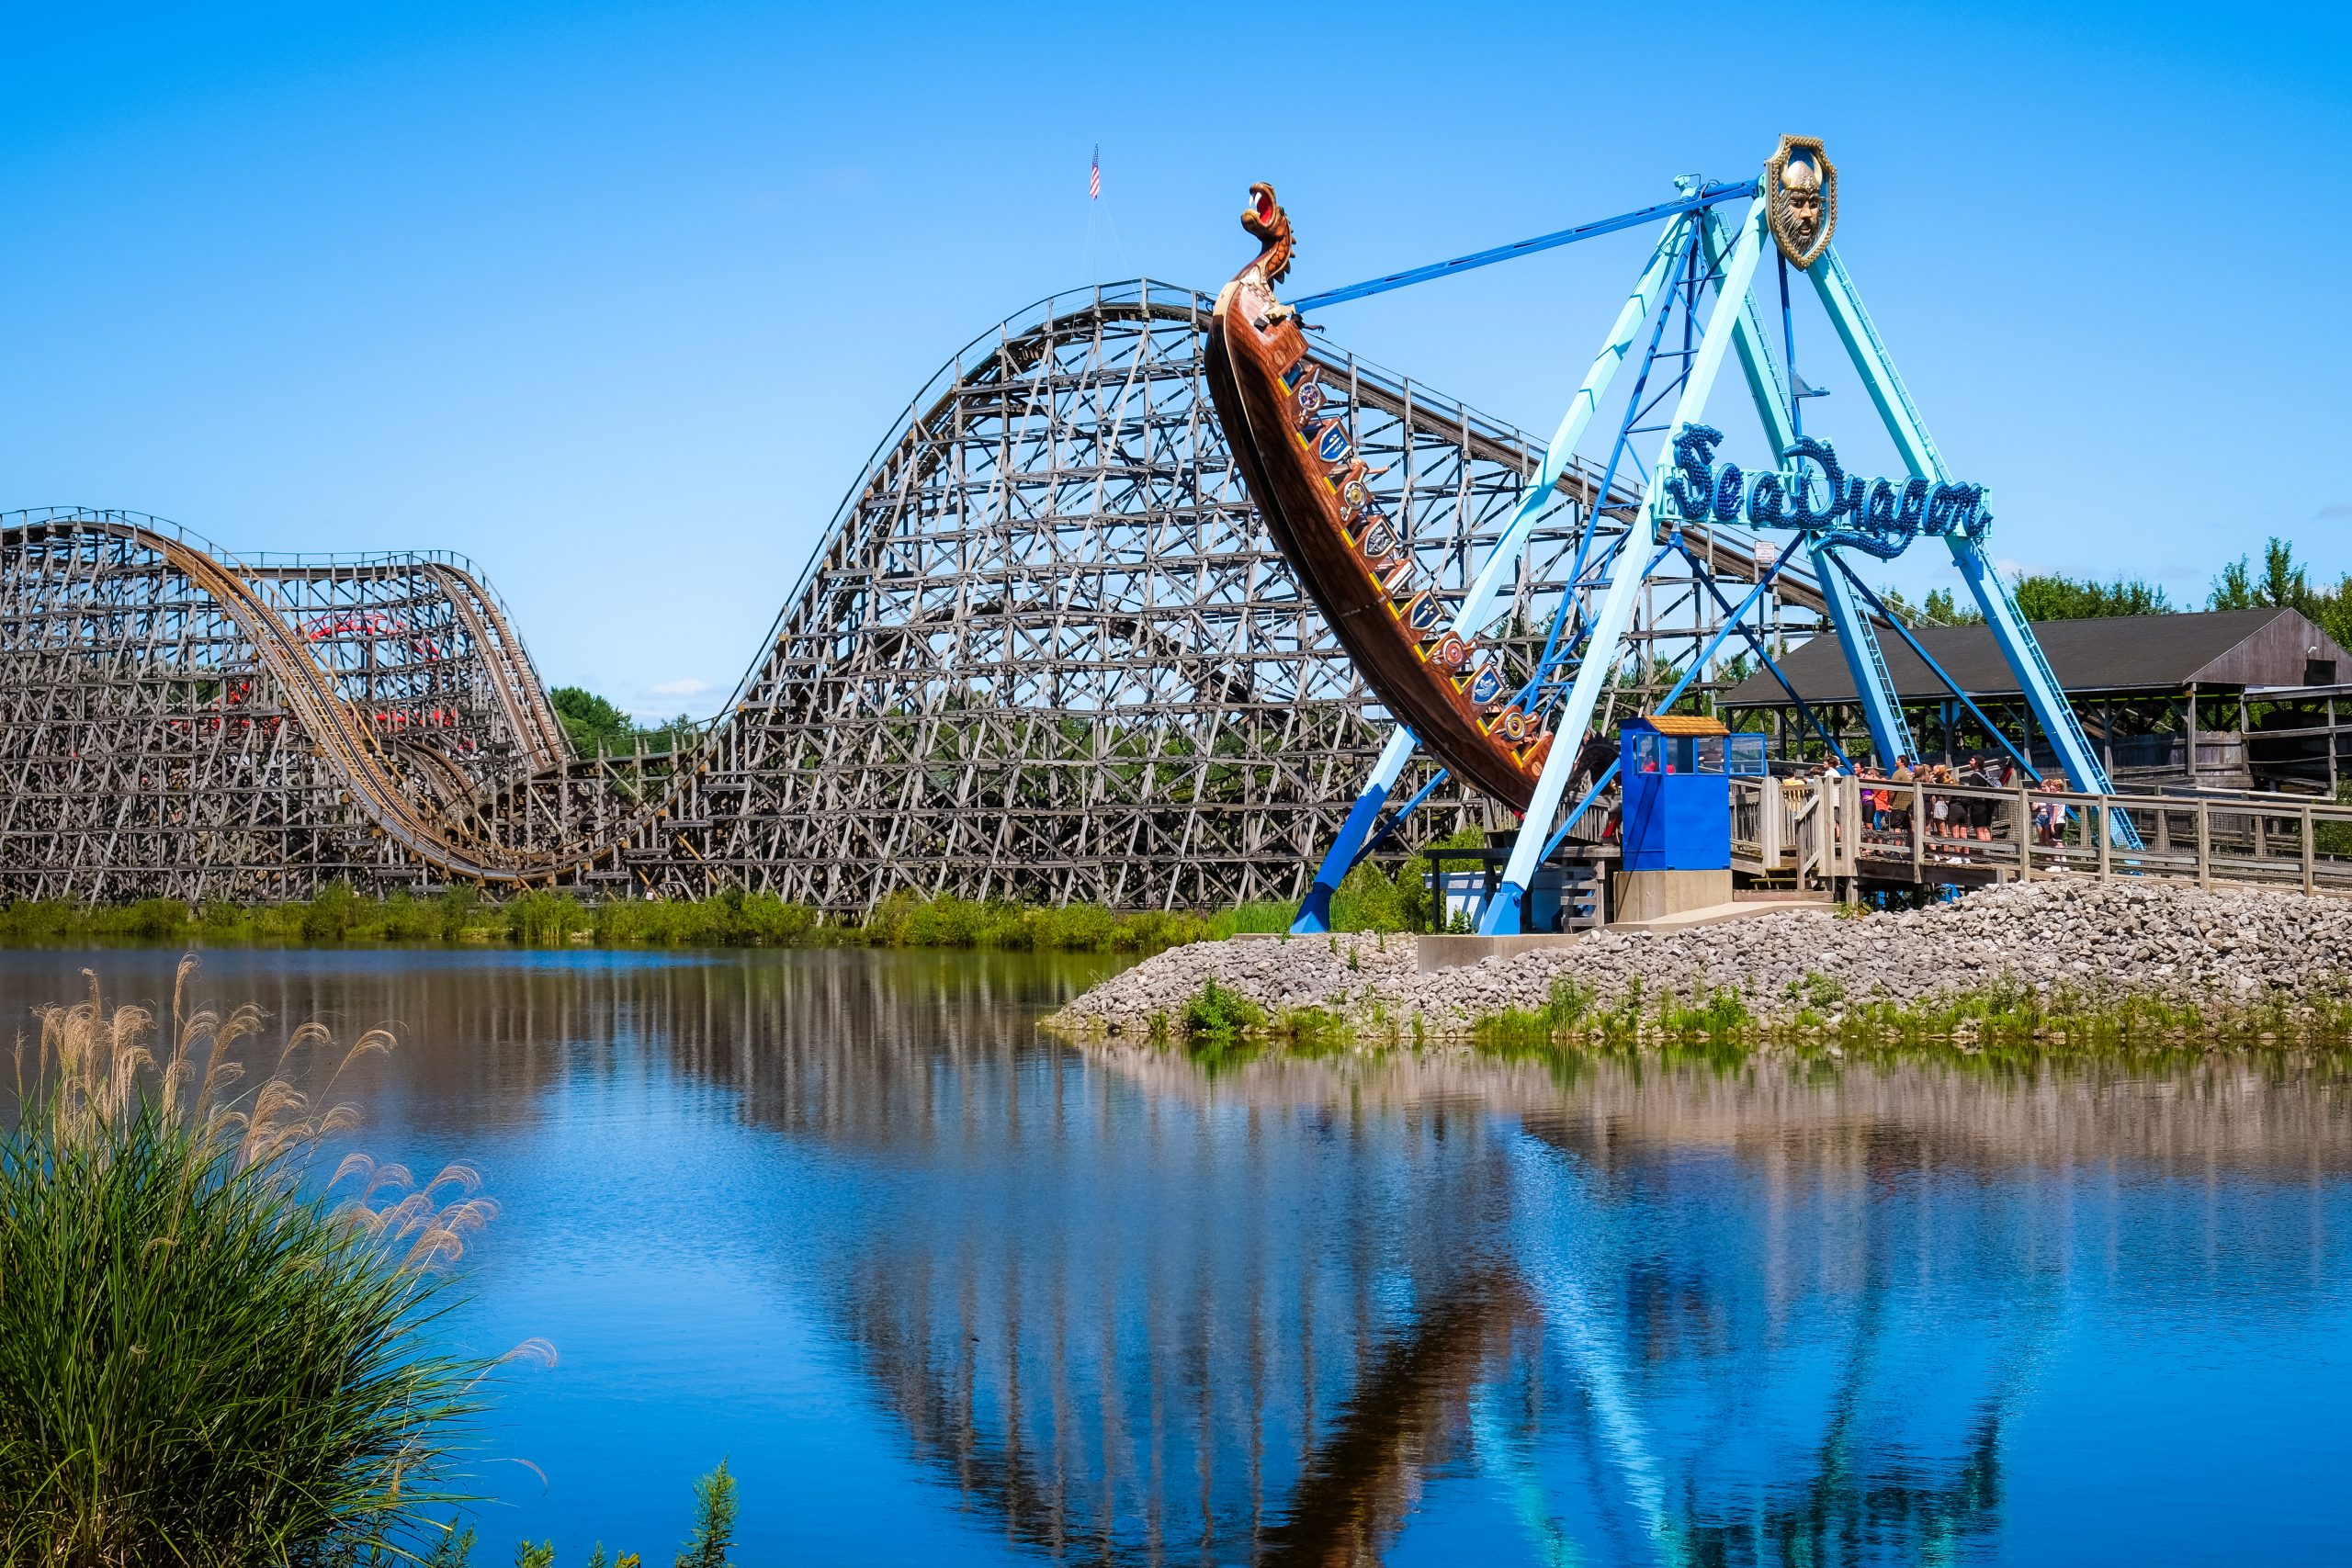 rollercoaster and seadragon rides are reflected in small lake at Michigan's Adventure amusement park